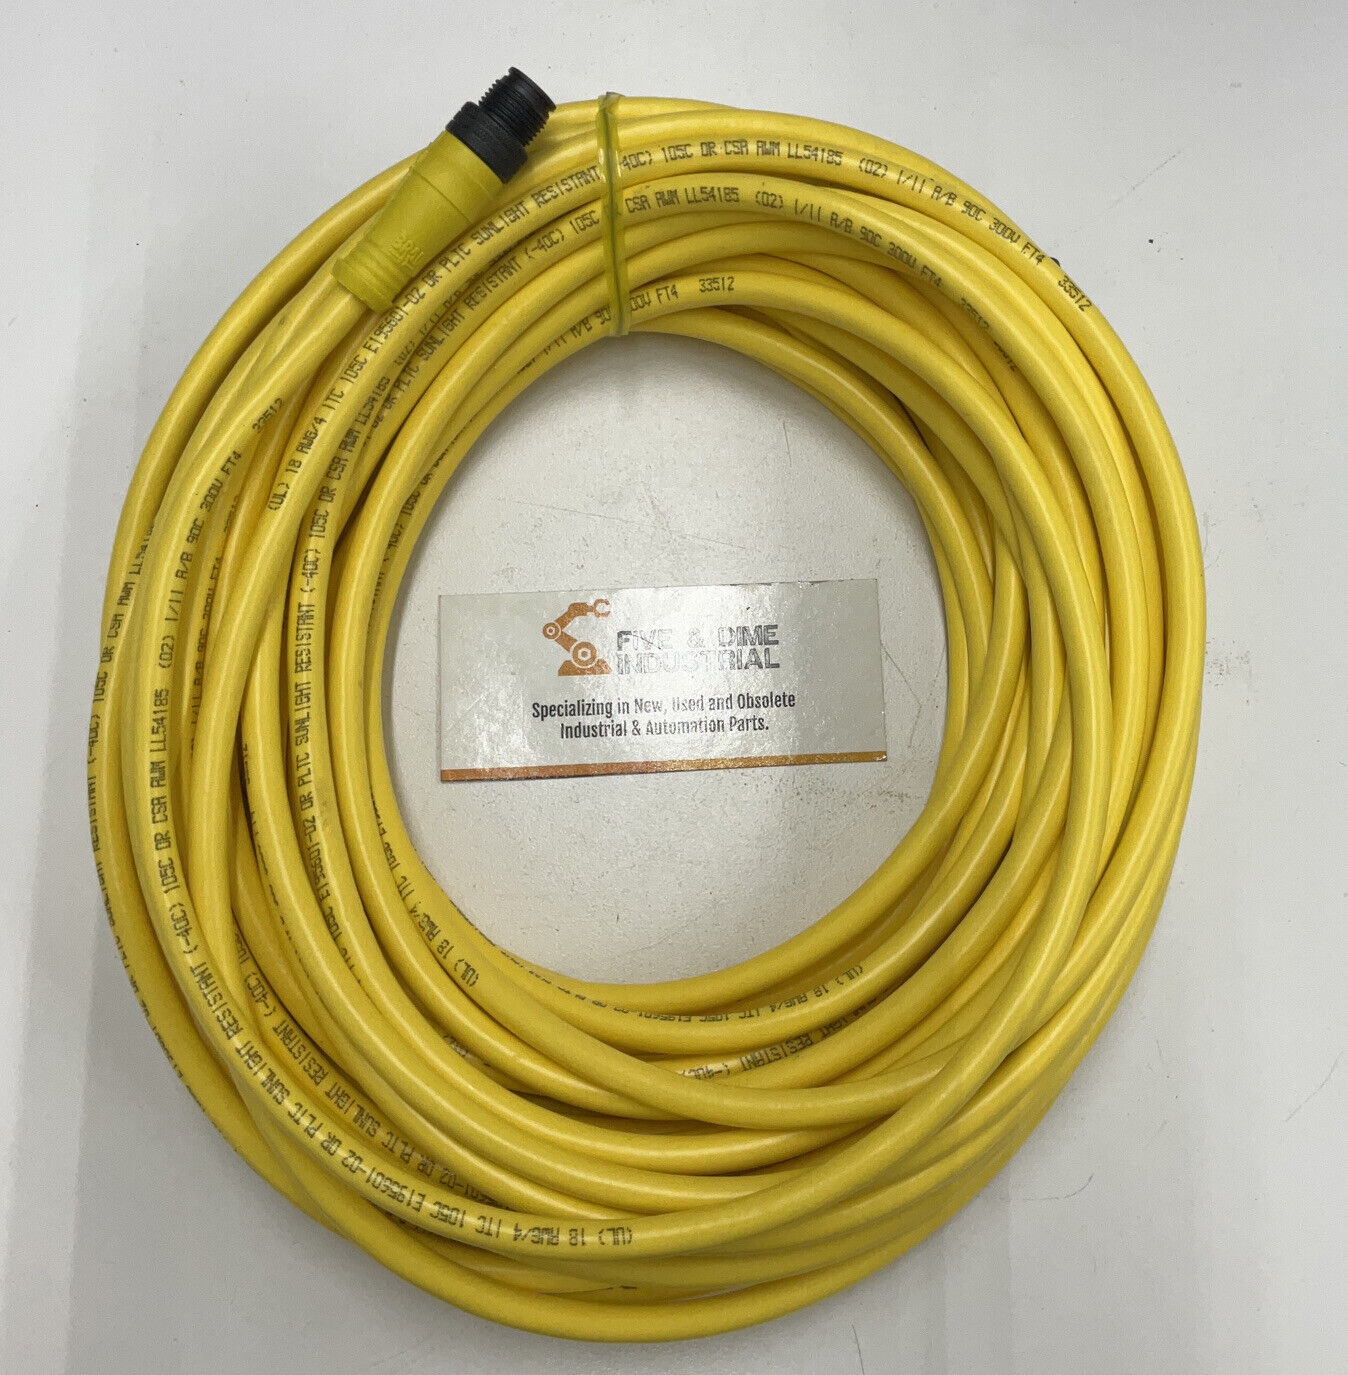 Brad Connectivity 884030K03M150 4-Pin Male Cable 15 Meters 1200660906 (CBL144)